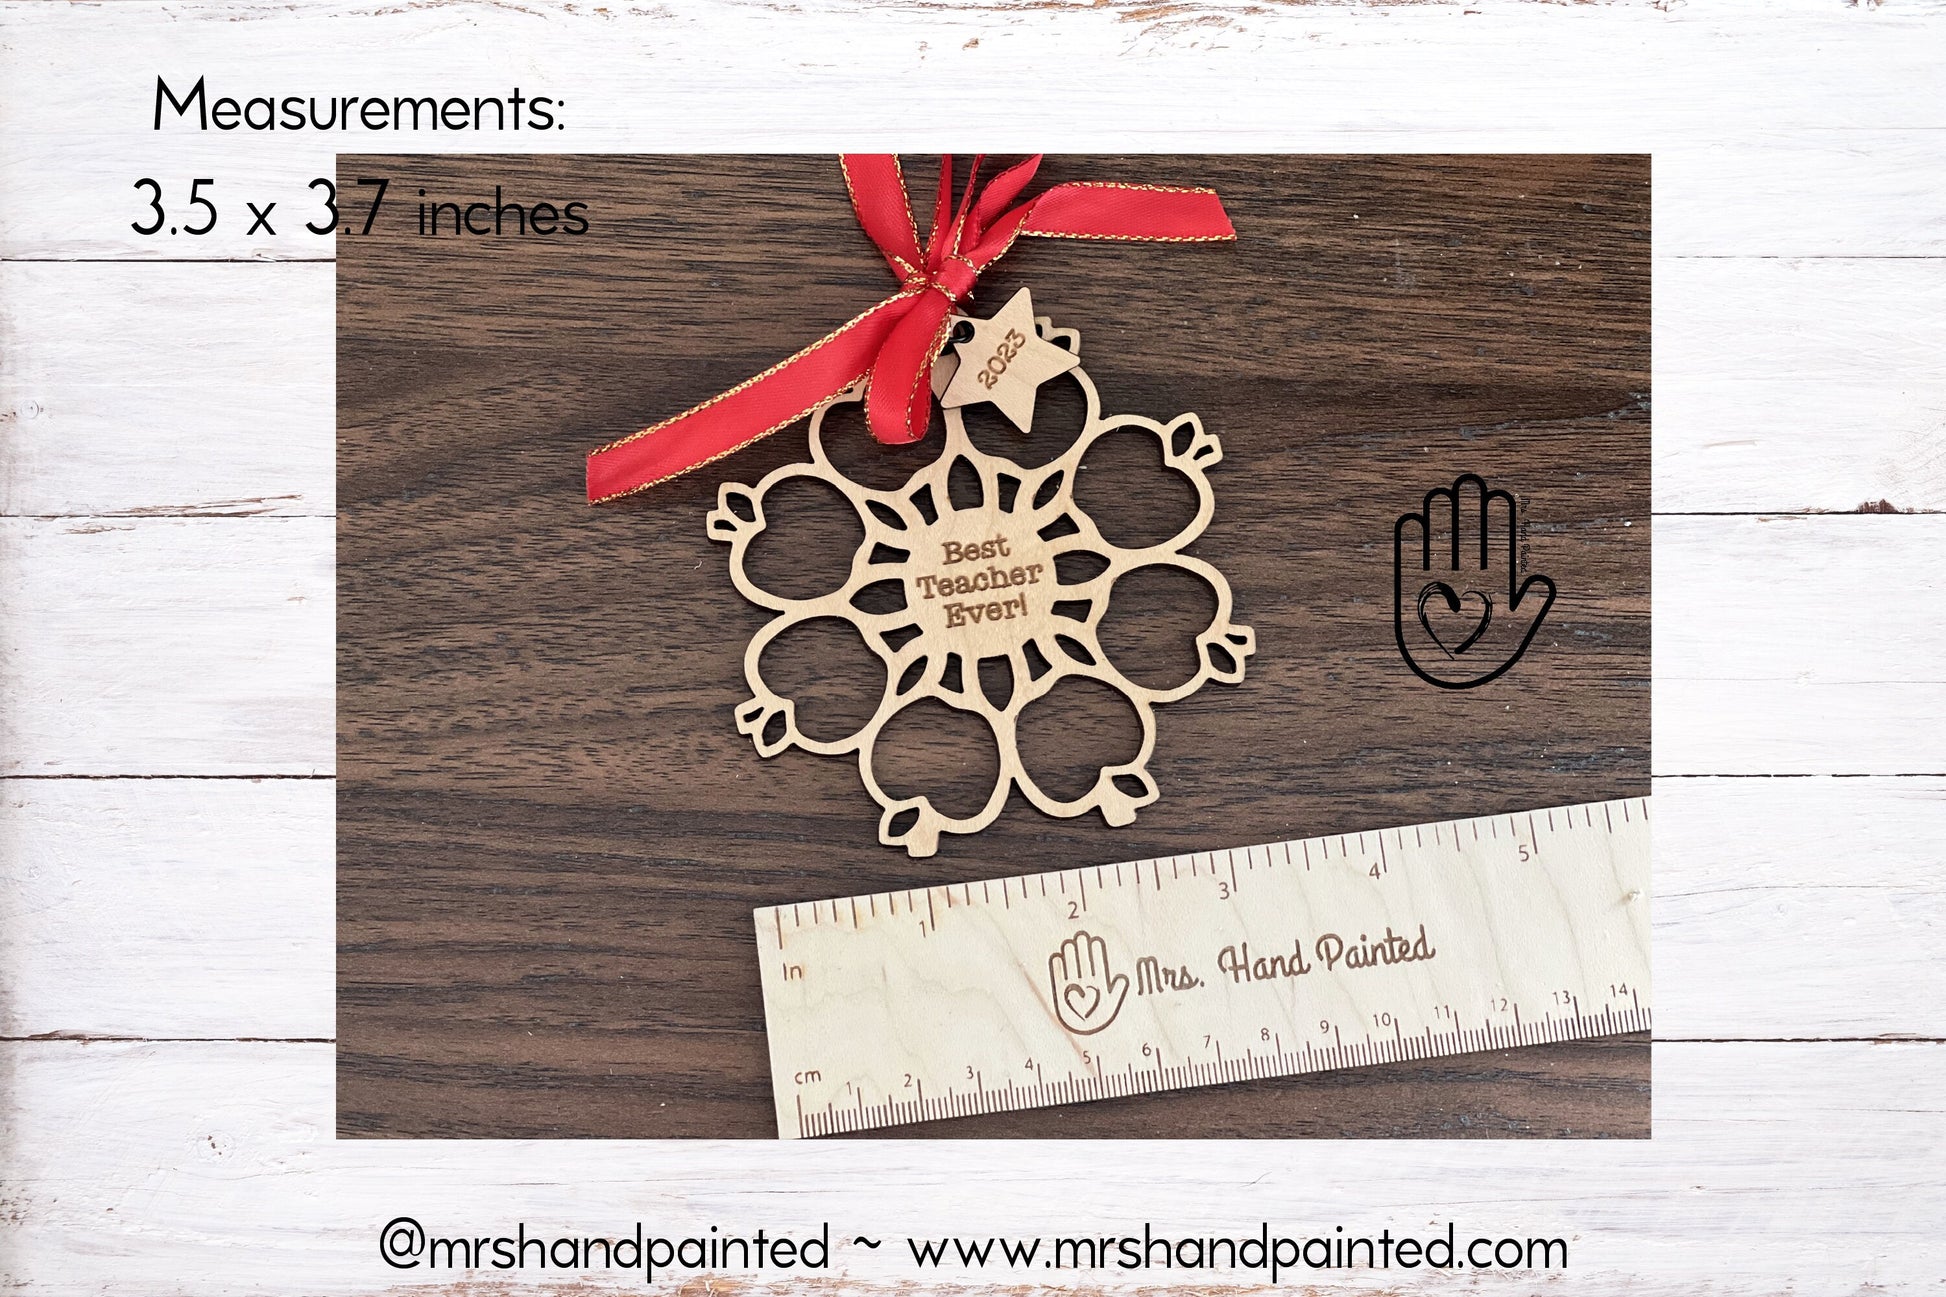 Laser Cut Wood Apple Snowflake Ornament - Personalized Teacher Gift